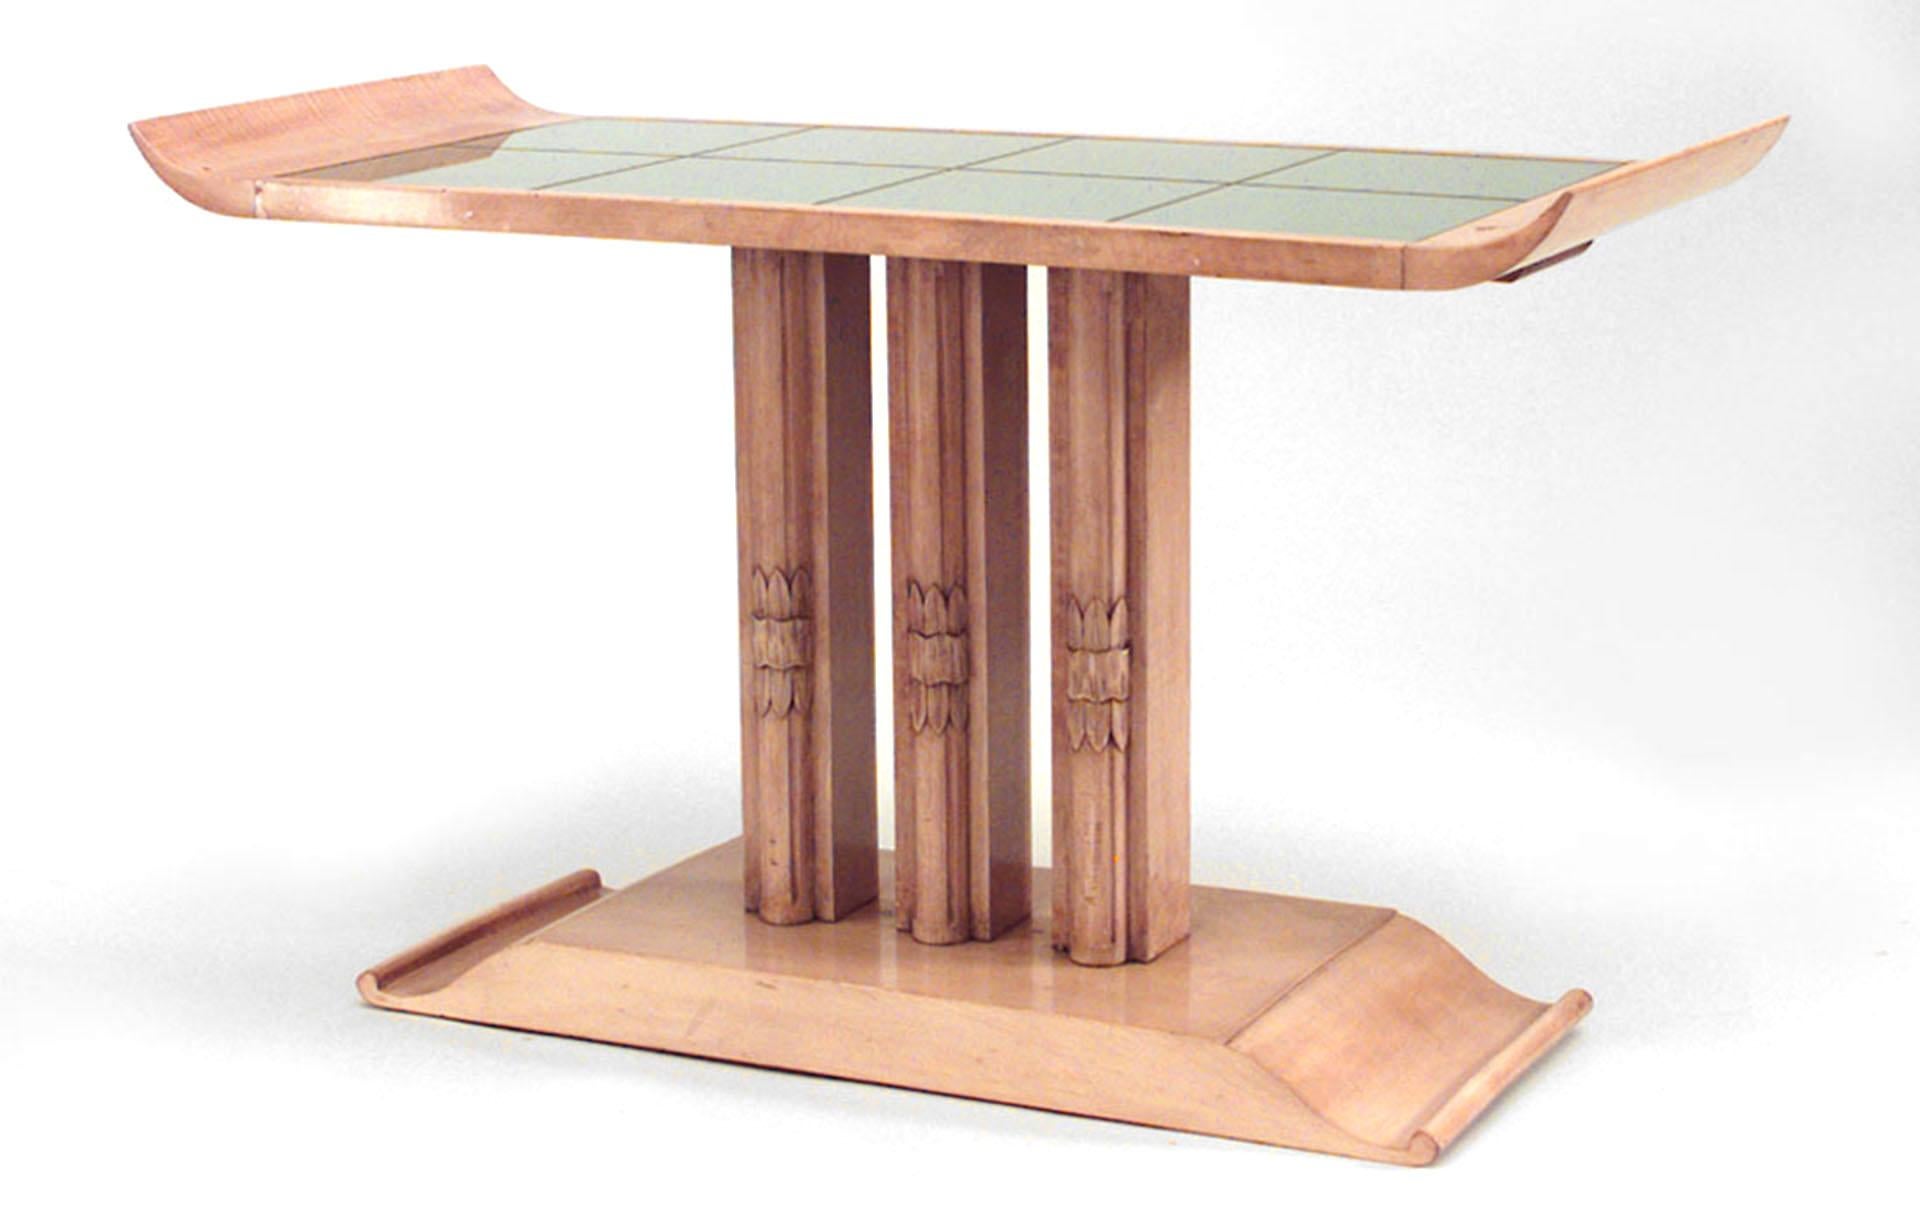 American Art Moderne rectangular sycamore high coffee table with carved triple column pedestal base and eight mirrored panels on top. (attributed to: T.H. ROBSJOHN GIBBINGS)
